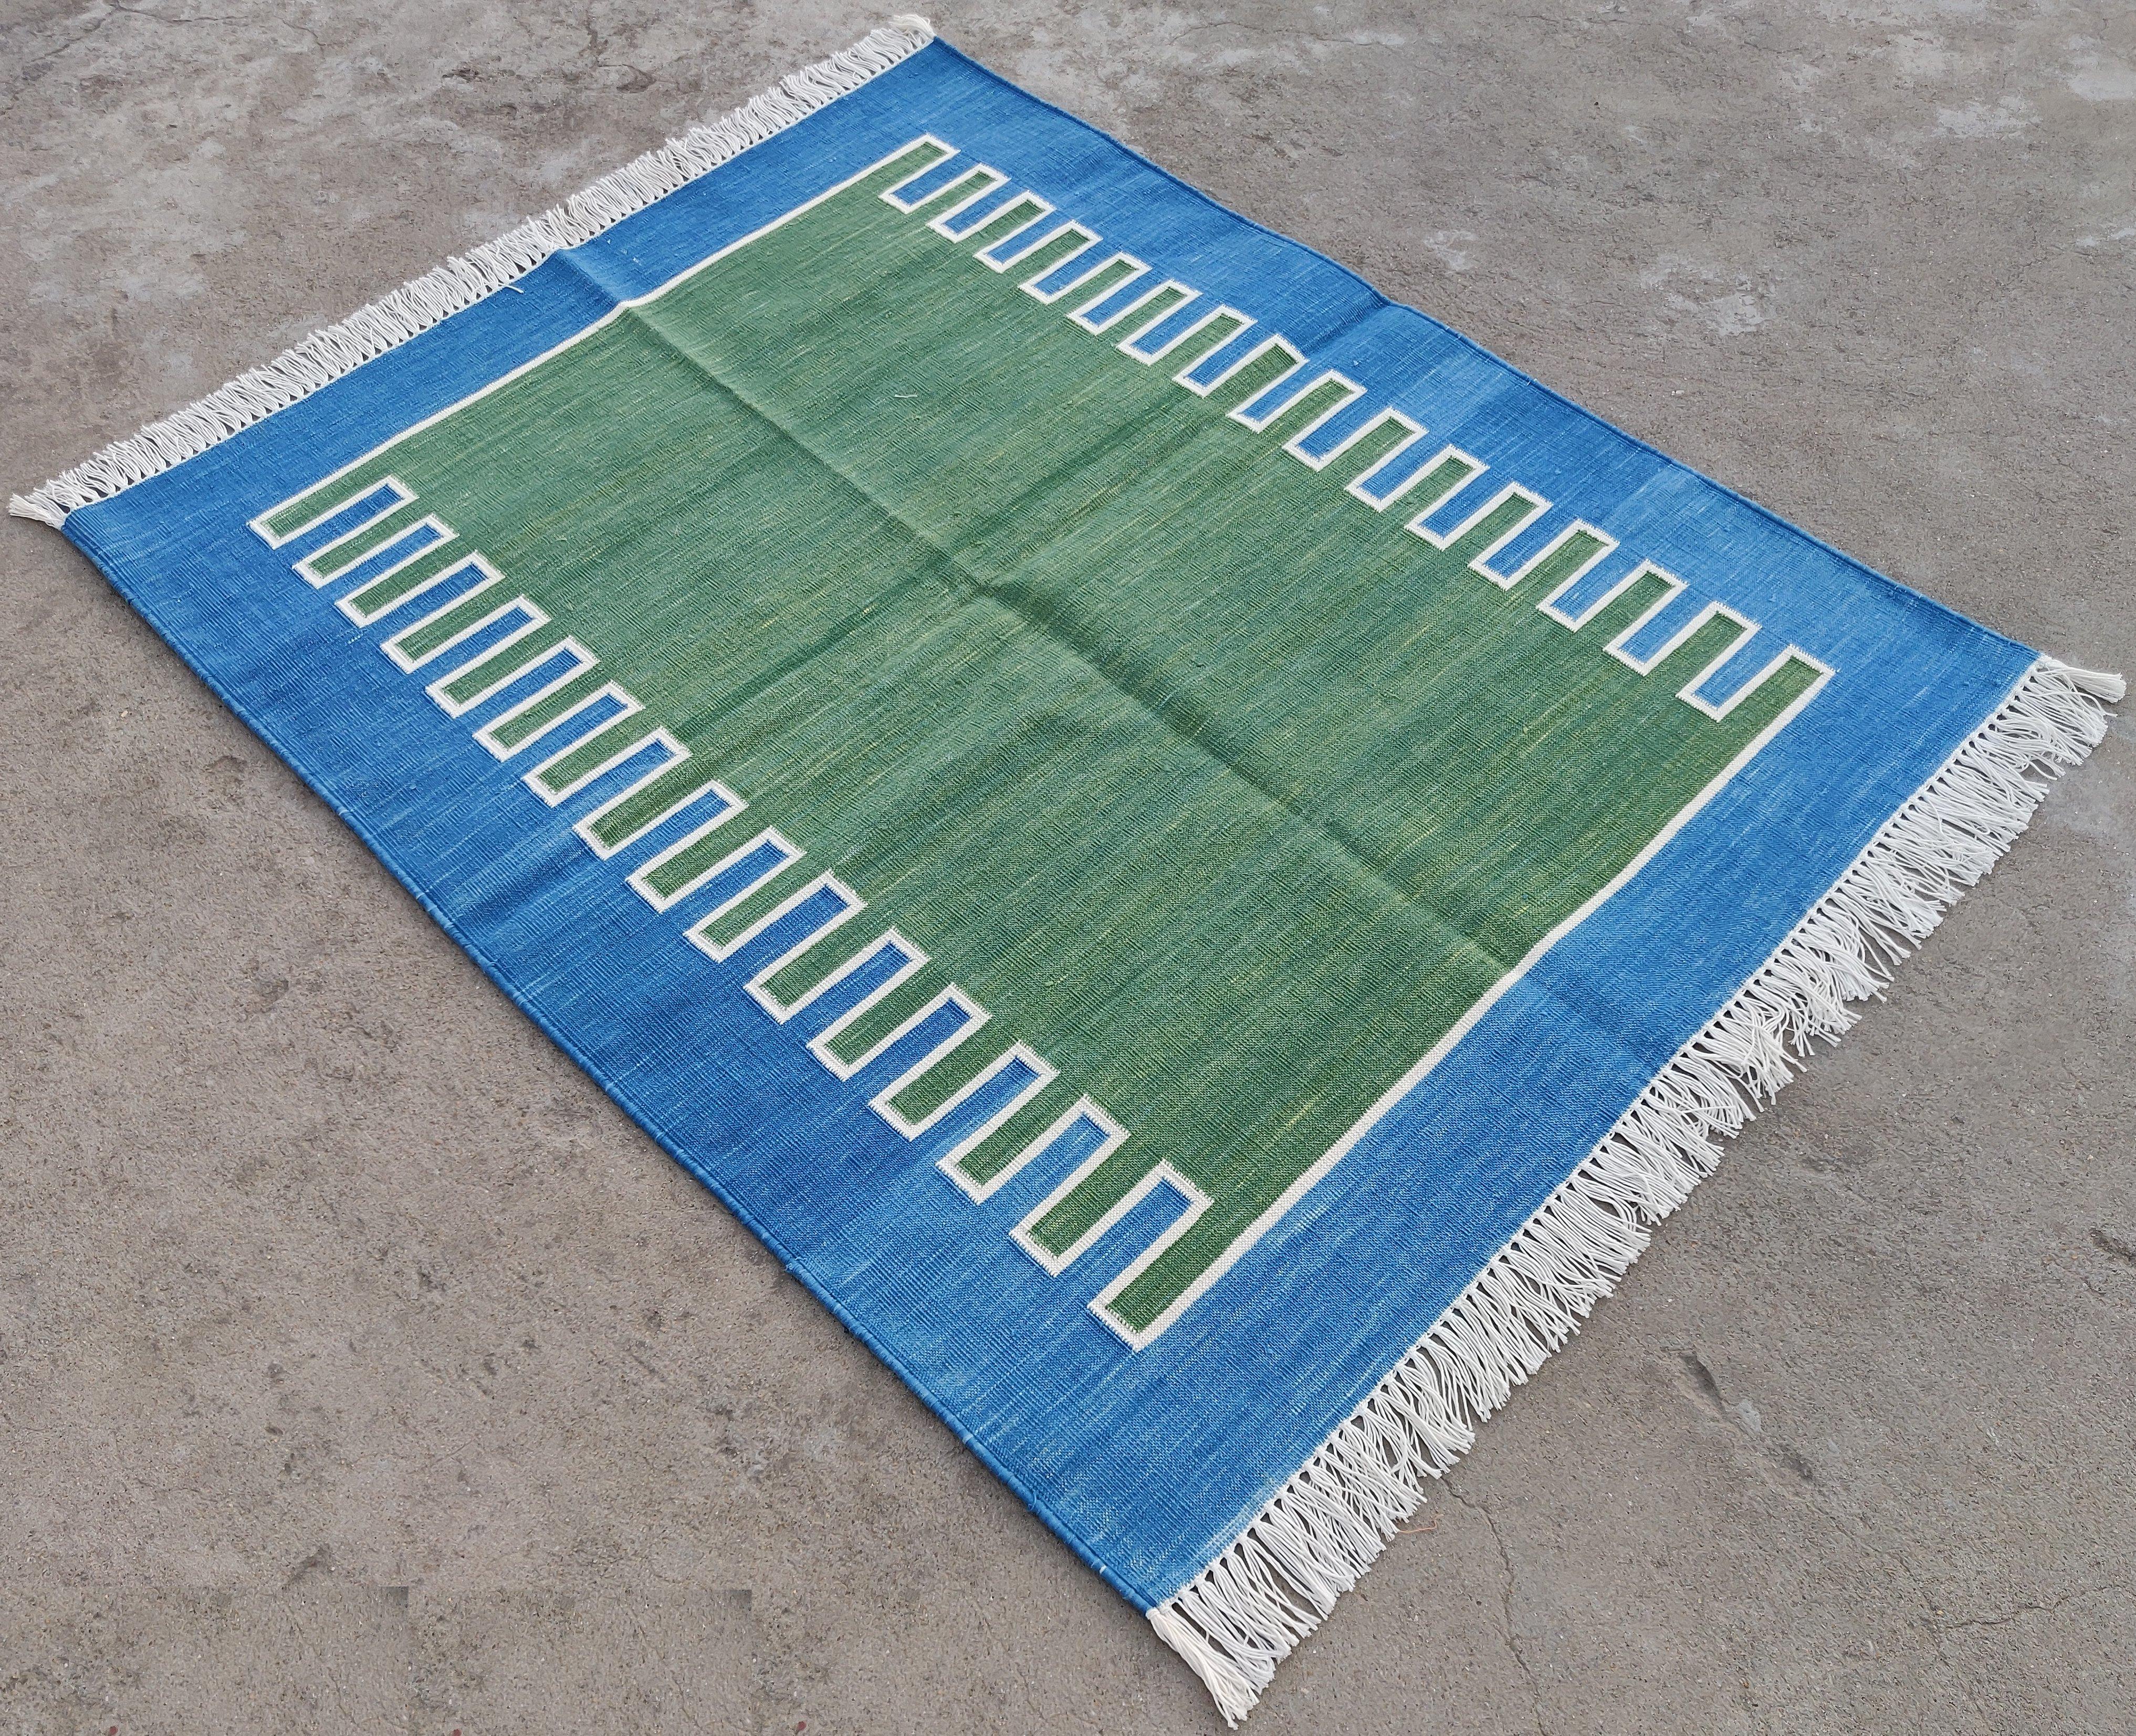 Cotton Vegetable Dyed Forest Green, Cream And Blue Zig Zag Striped Indian Dhurrie Rug-3'x5' (90x150cm)
These special flat-weave dhurries are hand-woven with 15 ply 100% cotton yarn. Due to the special manufacturing techniques used to create our